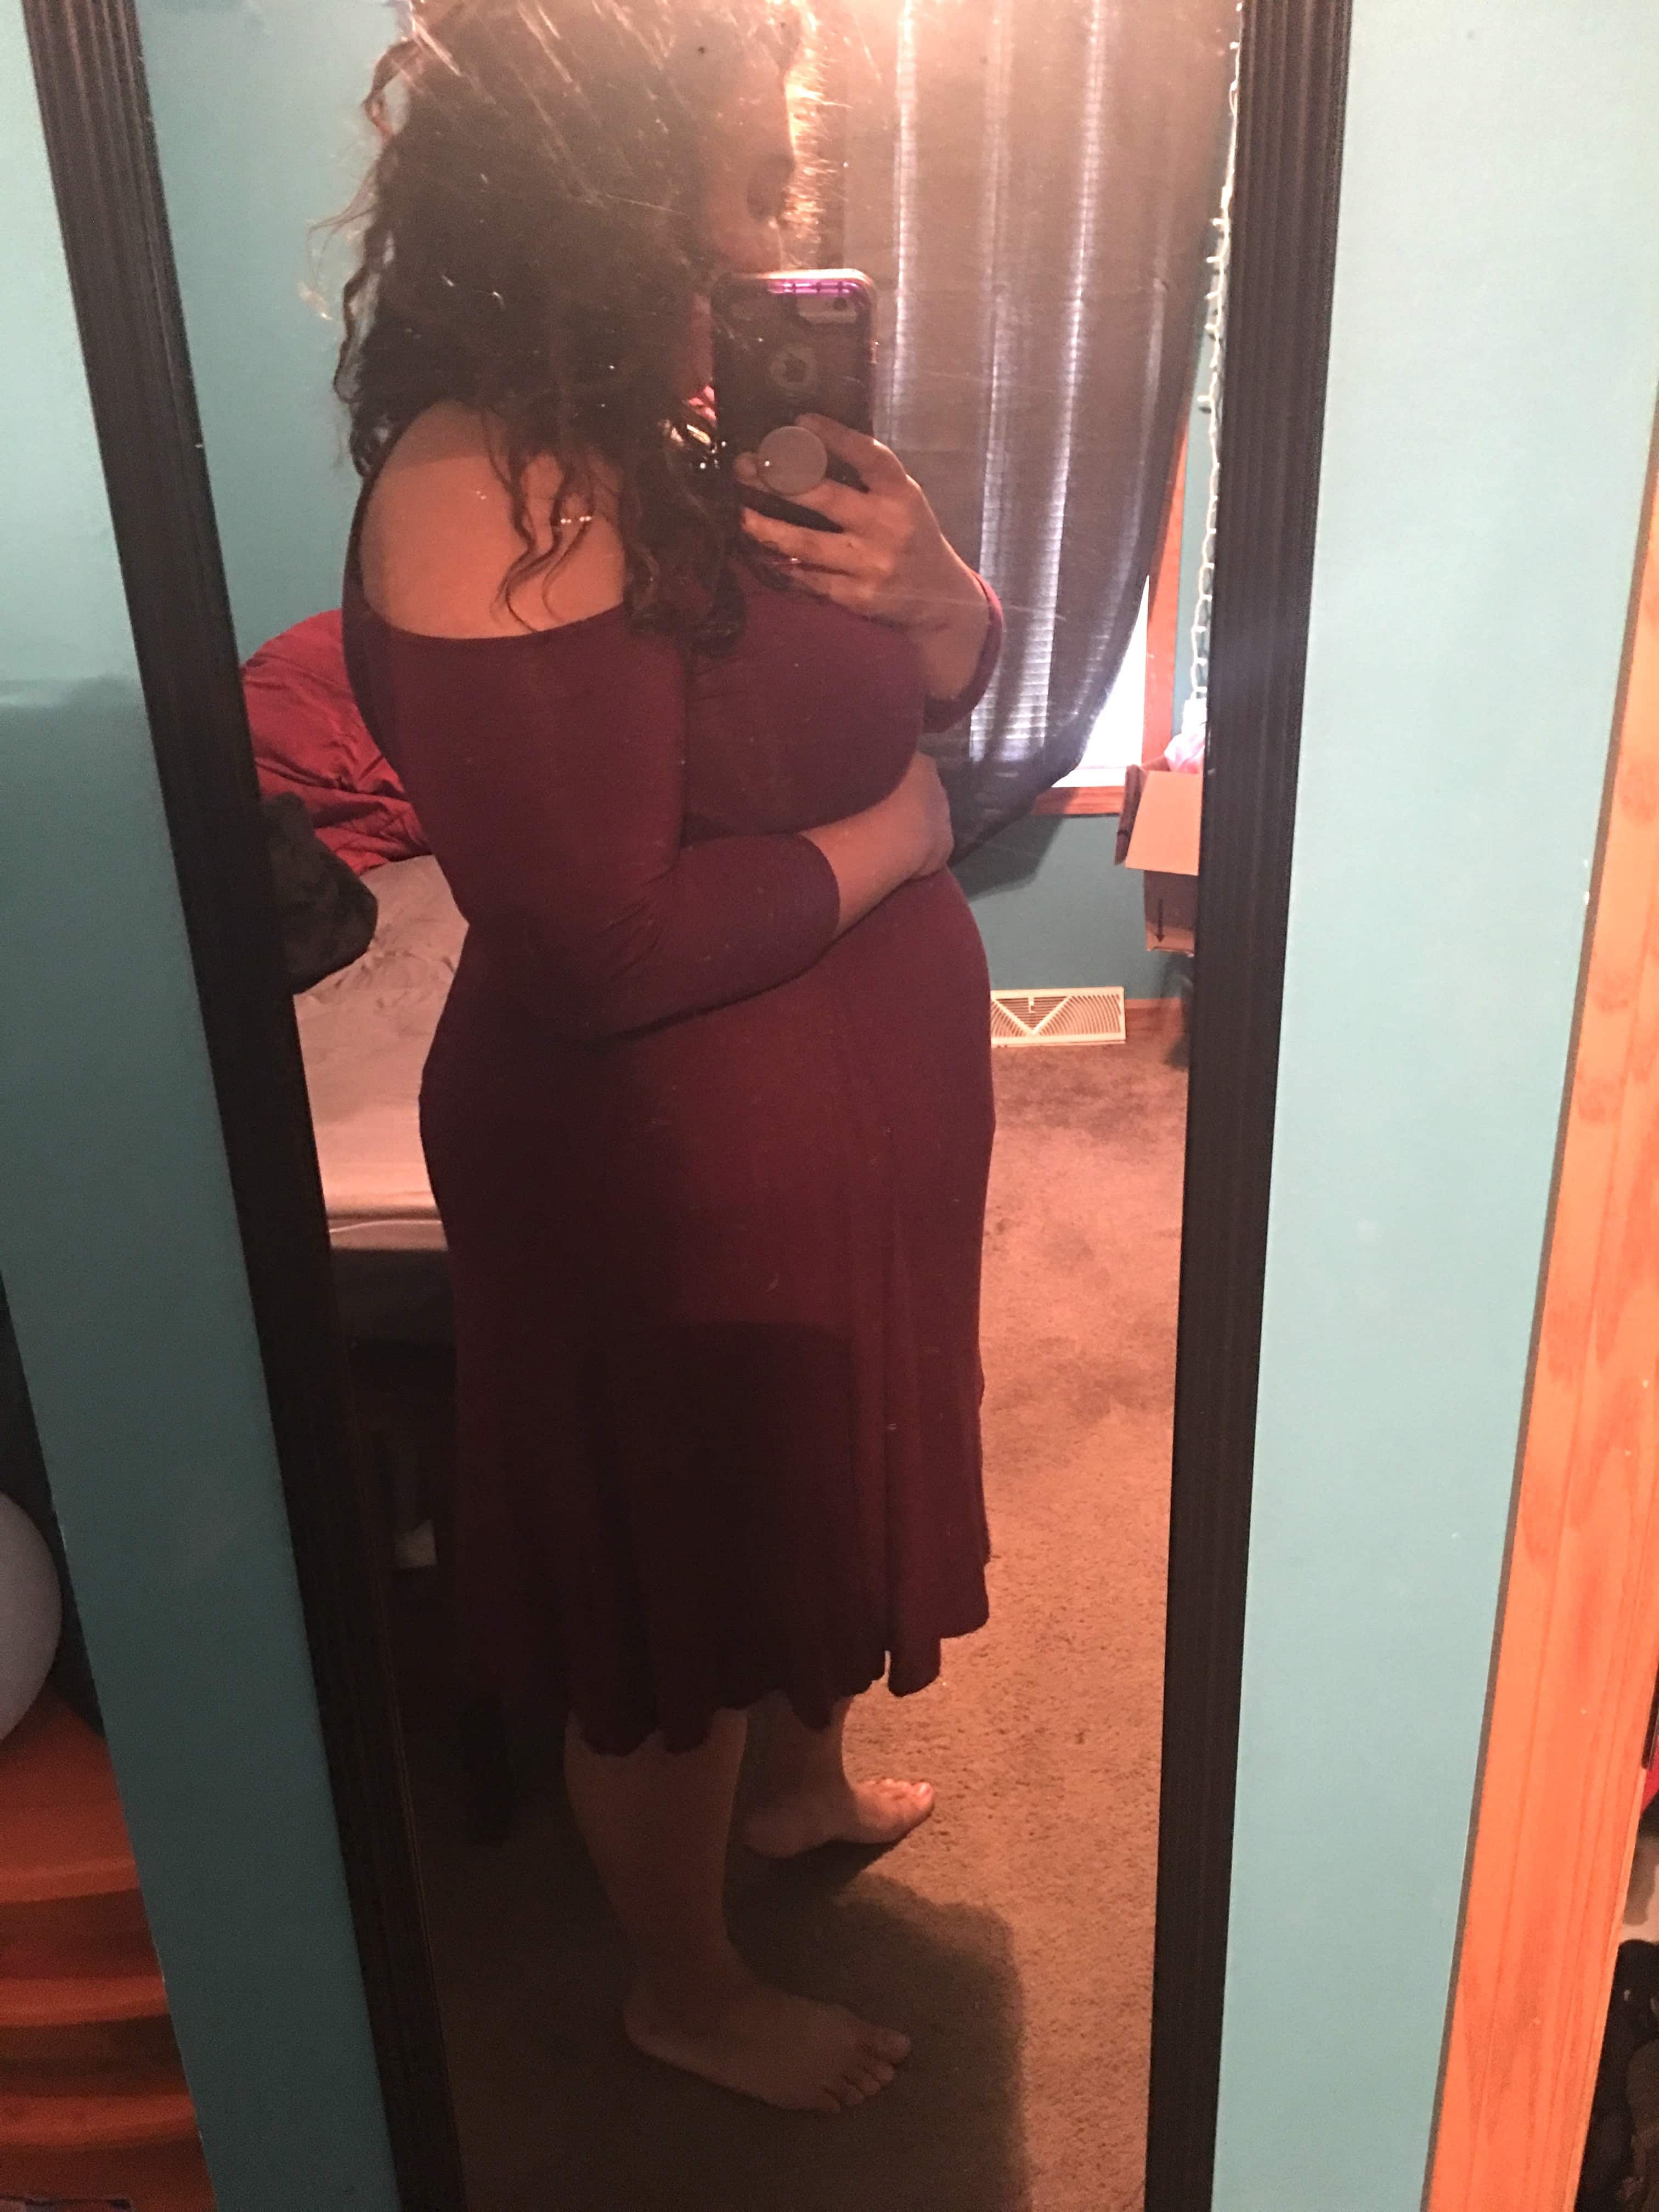 10 weeks pregnant with twins